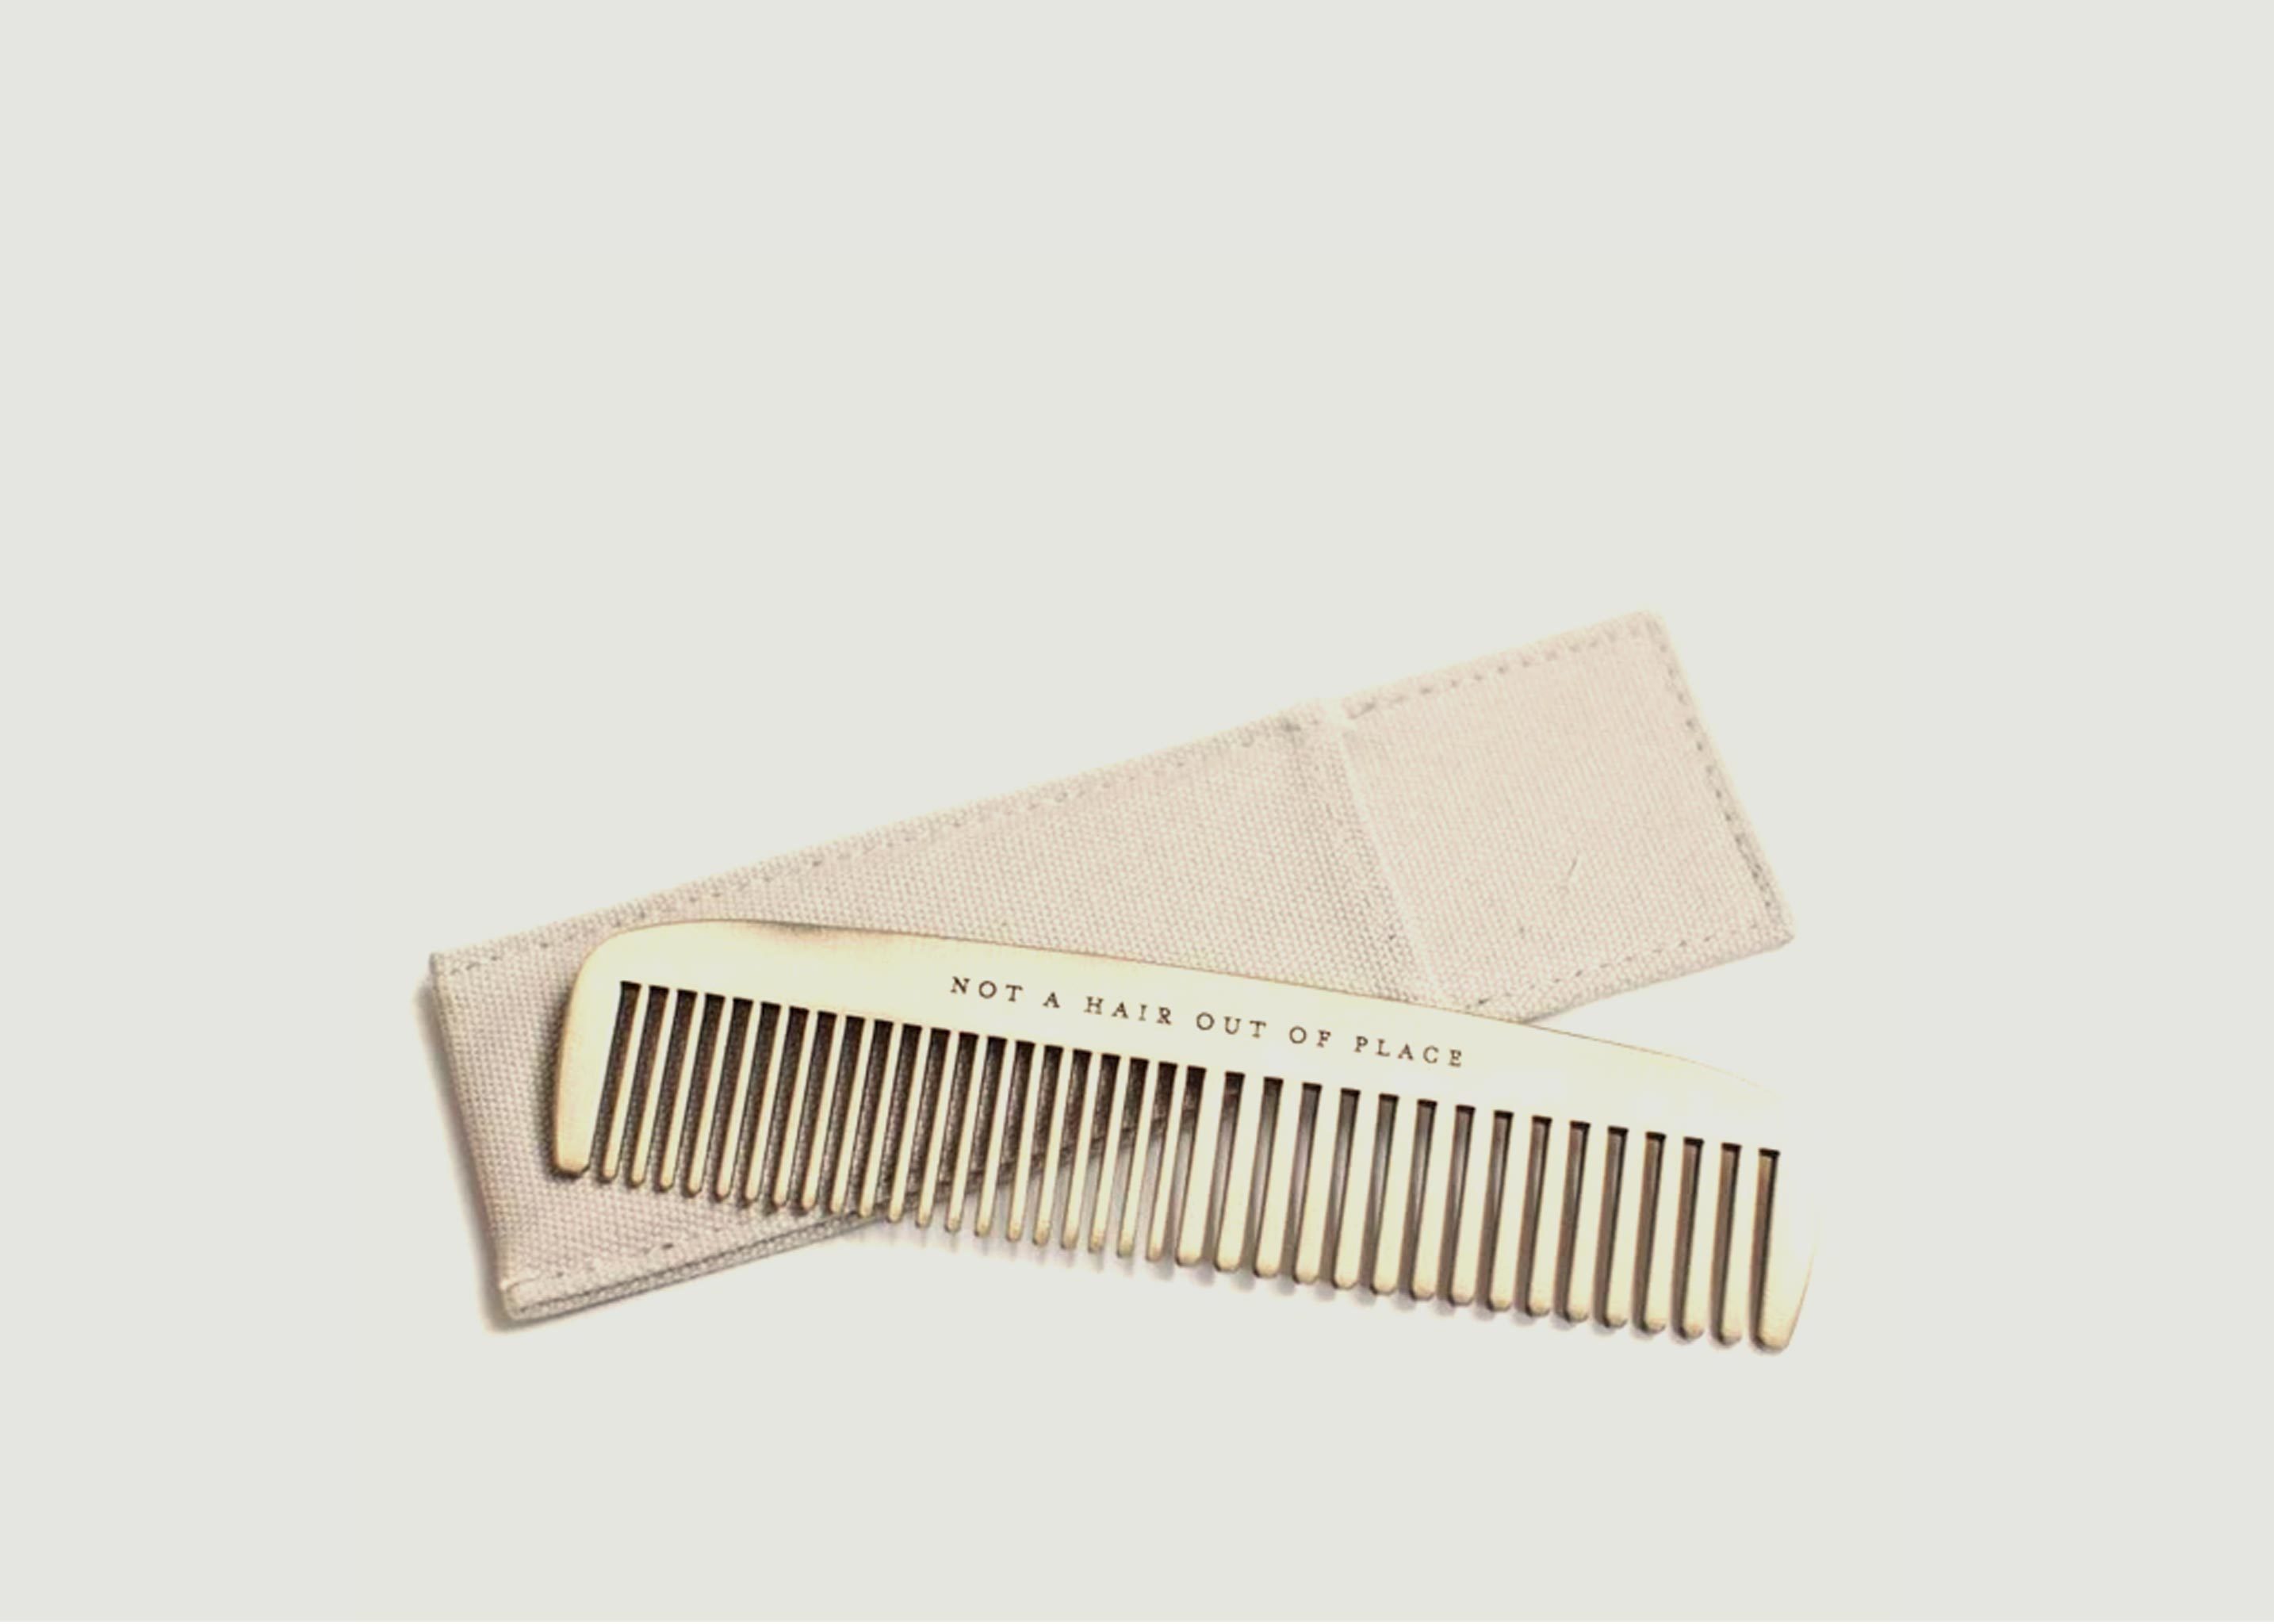 Comb - Not a Hair Out of Place - Men's Society